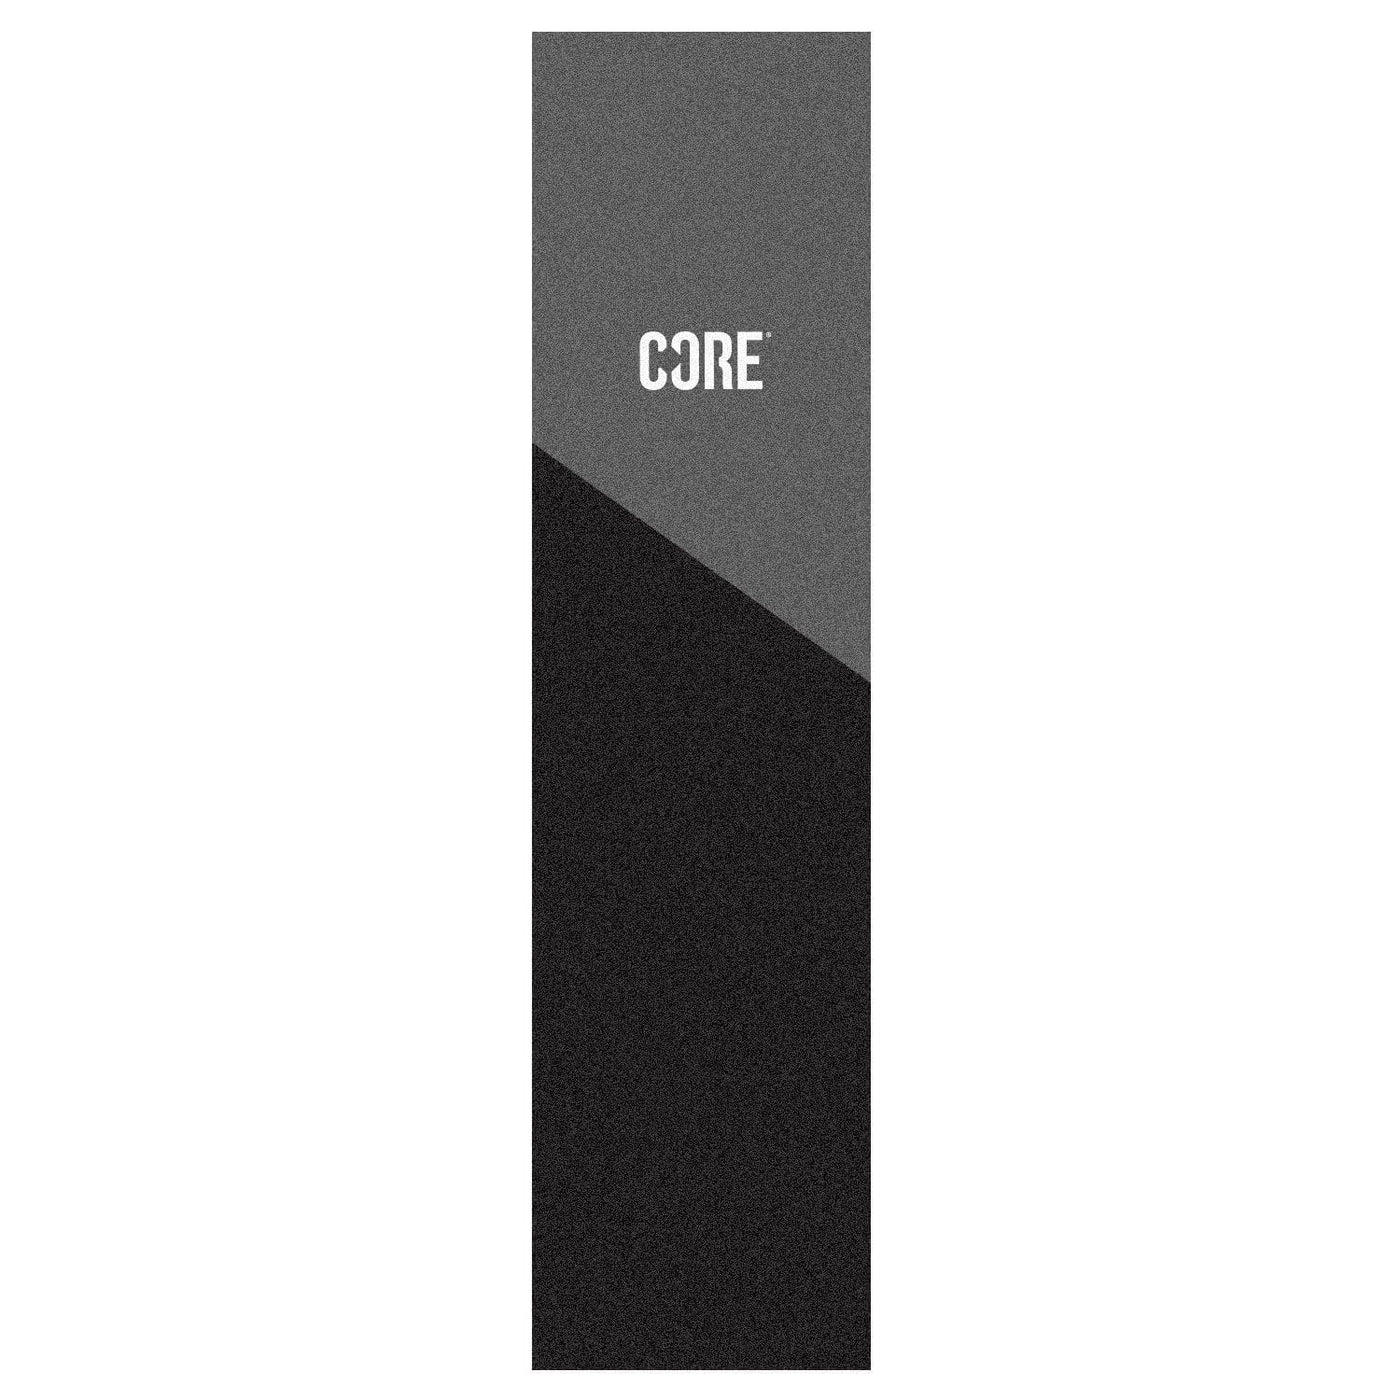 Core Scooter Grip Tape Split Grey I Grip Tape Scooter